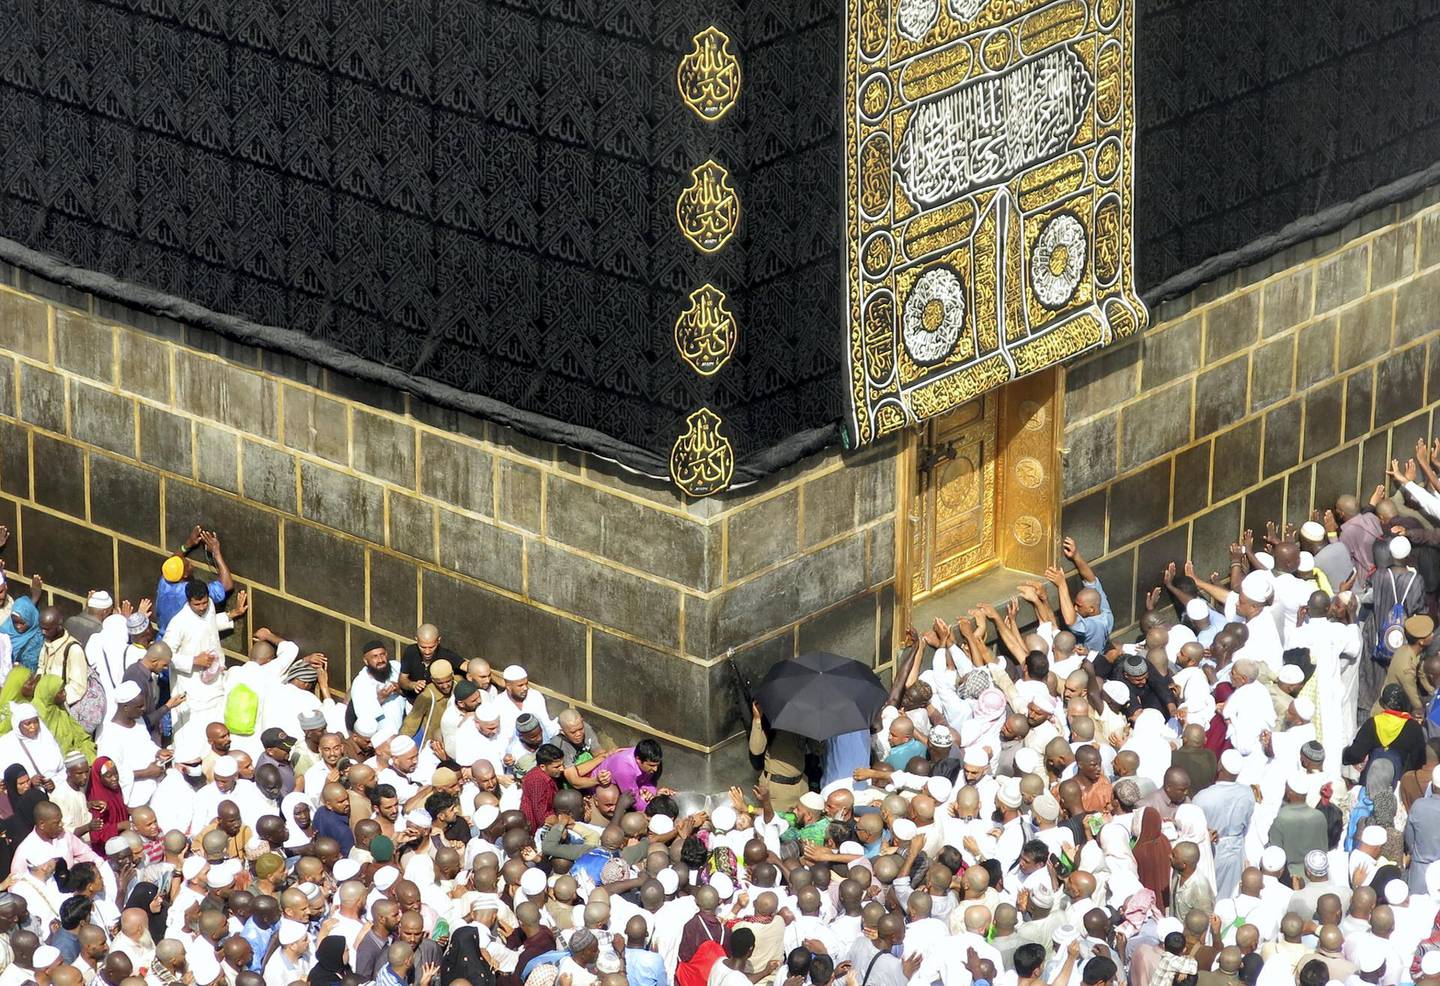 Muslim pilgrims from all around the world circle around the Kaaba at the Grand Mosque, in the Saudi city of Mecca on September 14, 2016. - More than 1.8 million faithful from around the world have been attending the annual pilgrimage which officially ends on September 15. (Photo by AHMAD GHARABLI / AFP)